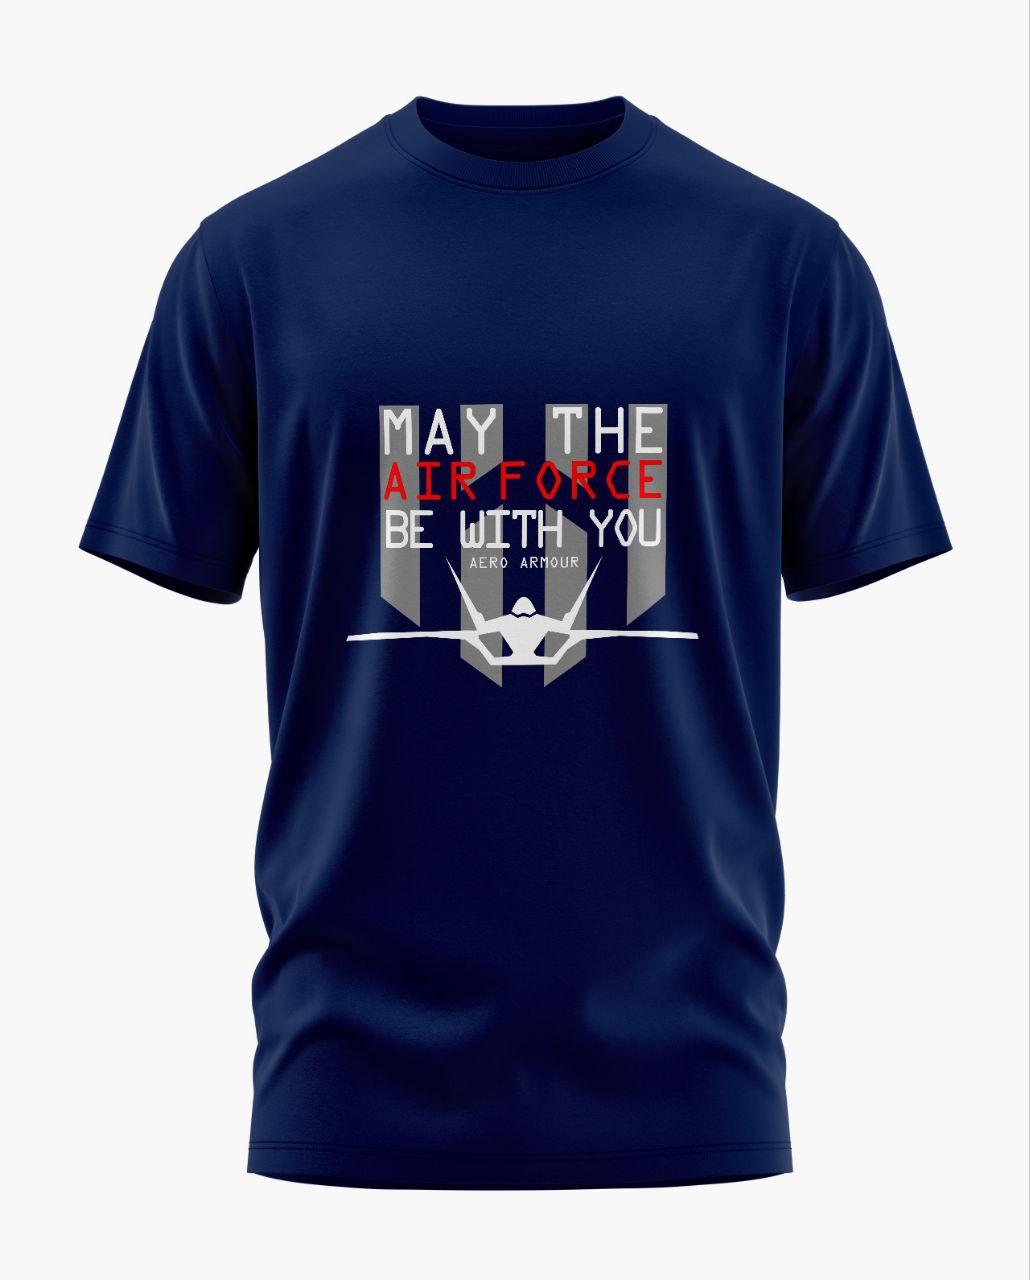 May The Airforce Be With You T-Shirt - Aero Armour